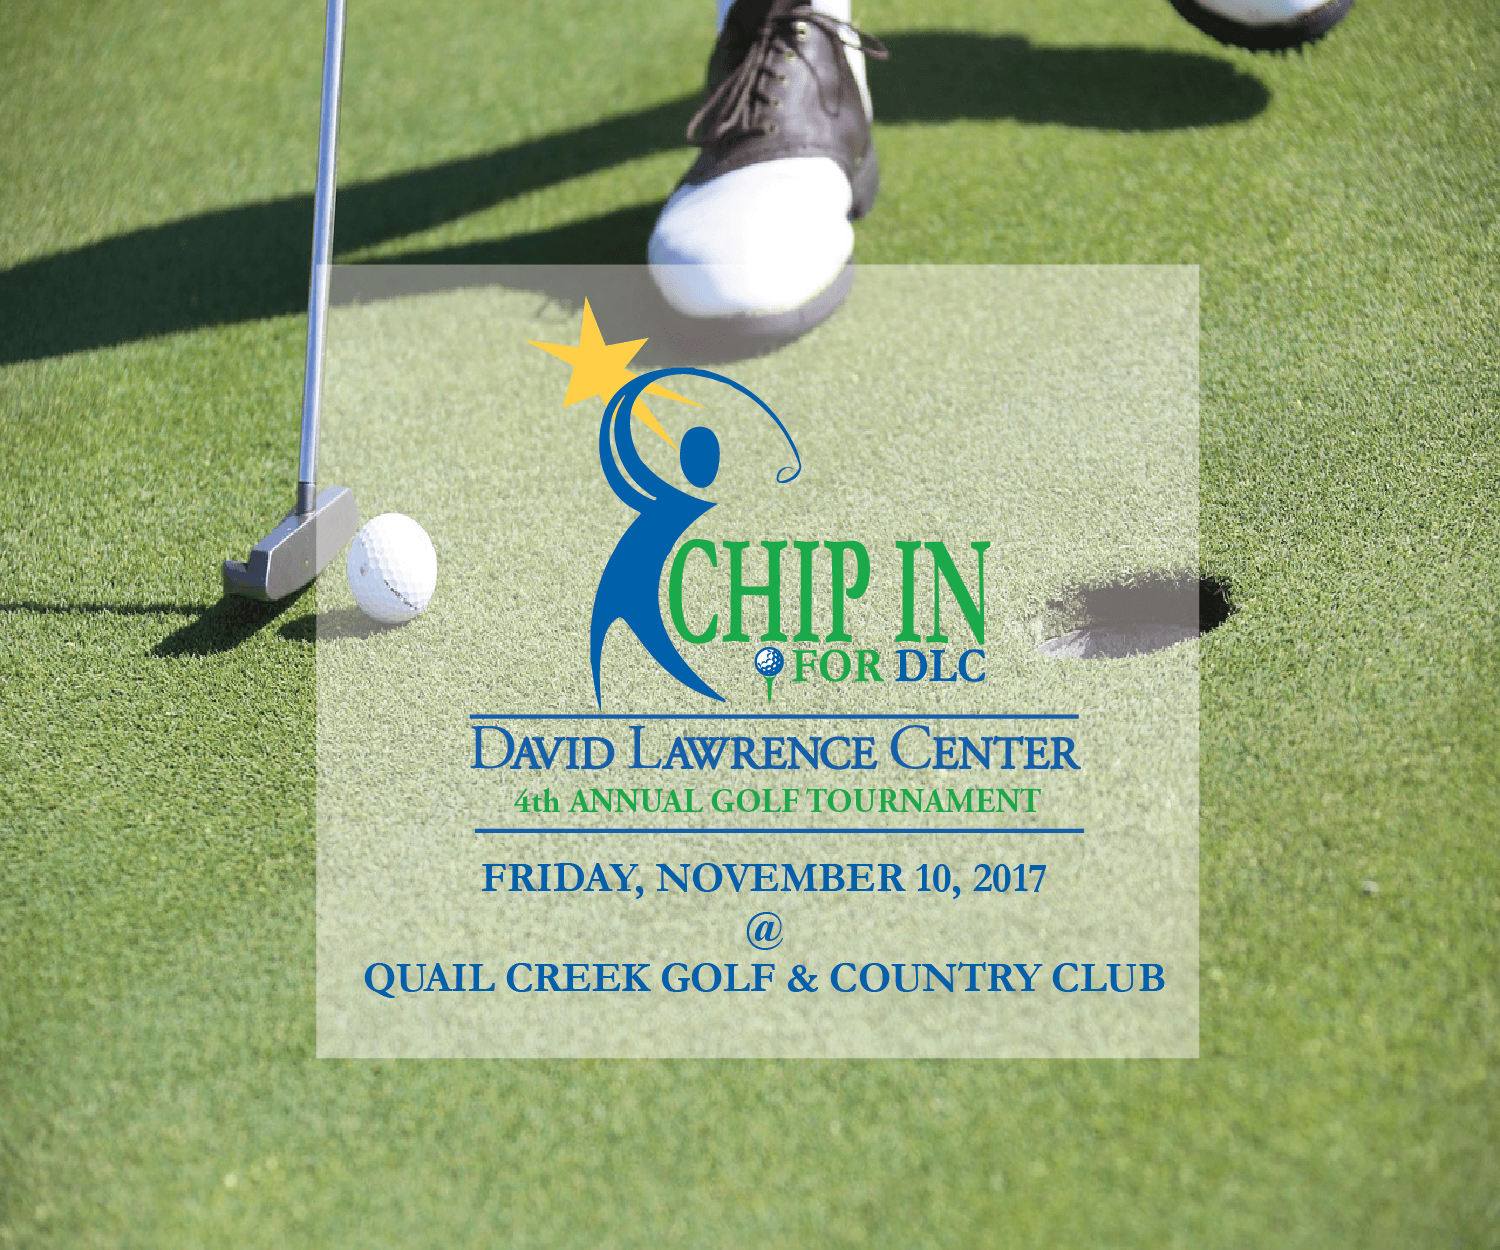 Tickets and Sponsorships Now Available for Chip in for DLC Golf Tournament Set for November 10, 2017